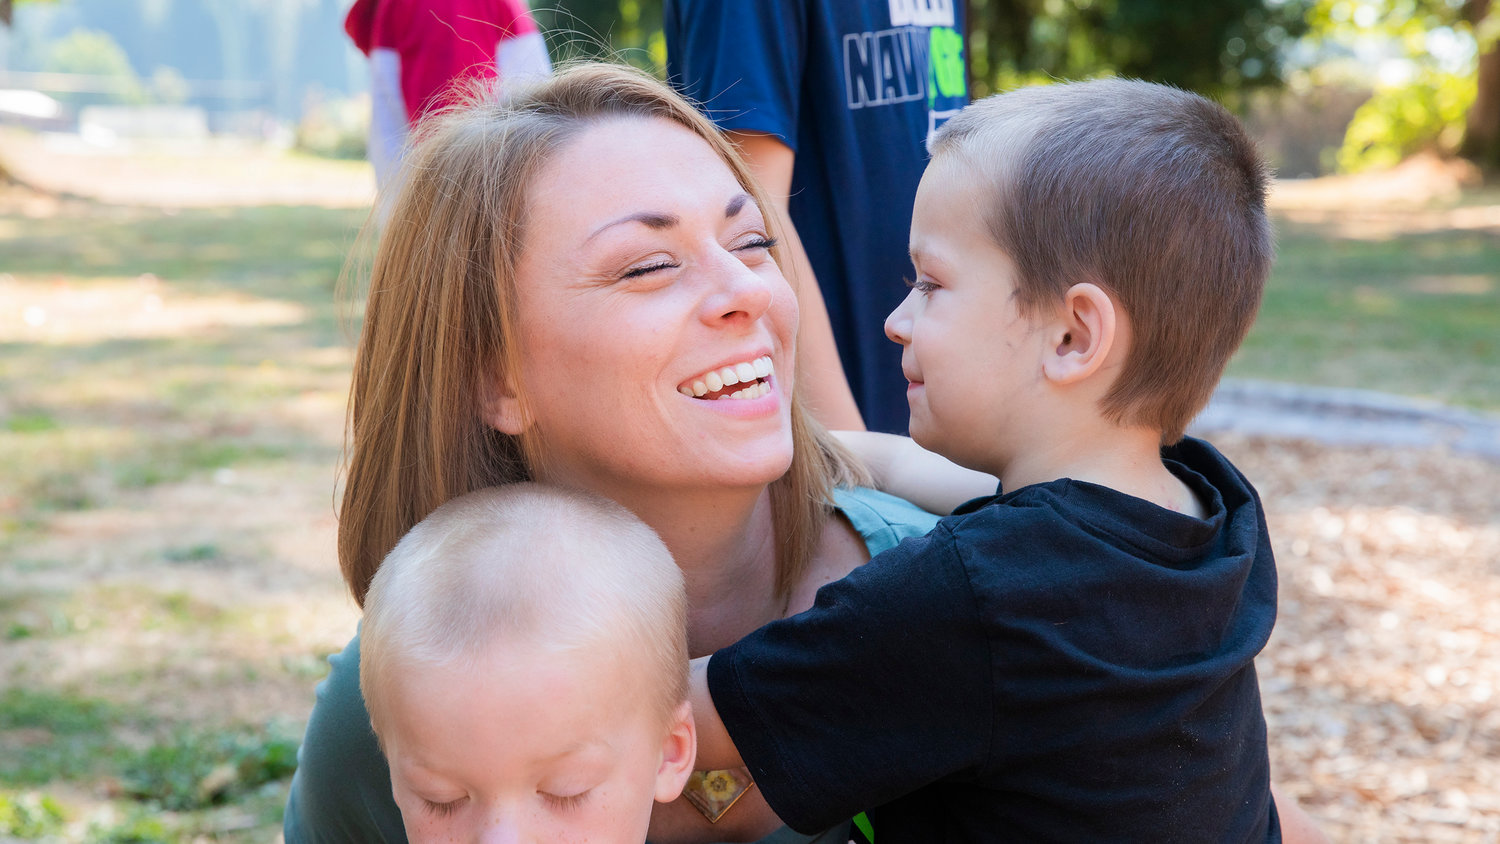 Rena Kreis smiles after receiving a kiss from Titus Sickles, 4, Tuesday afternoon at Kemp Olson Memorial Park in Toledo.